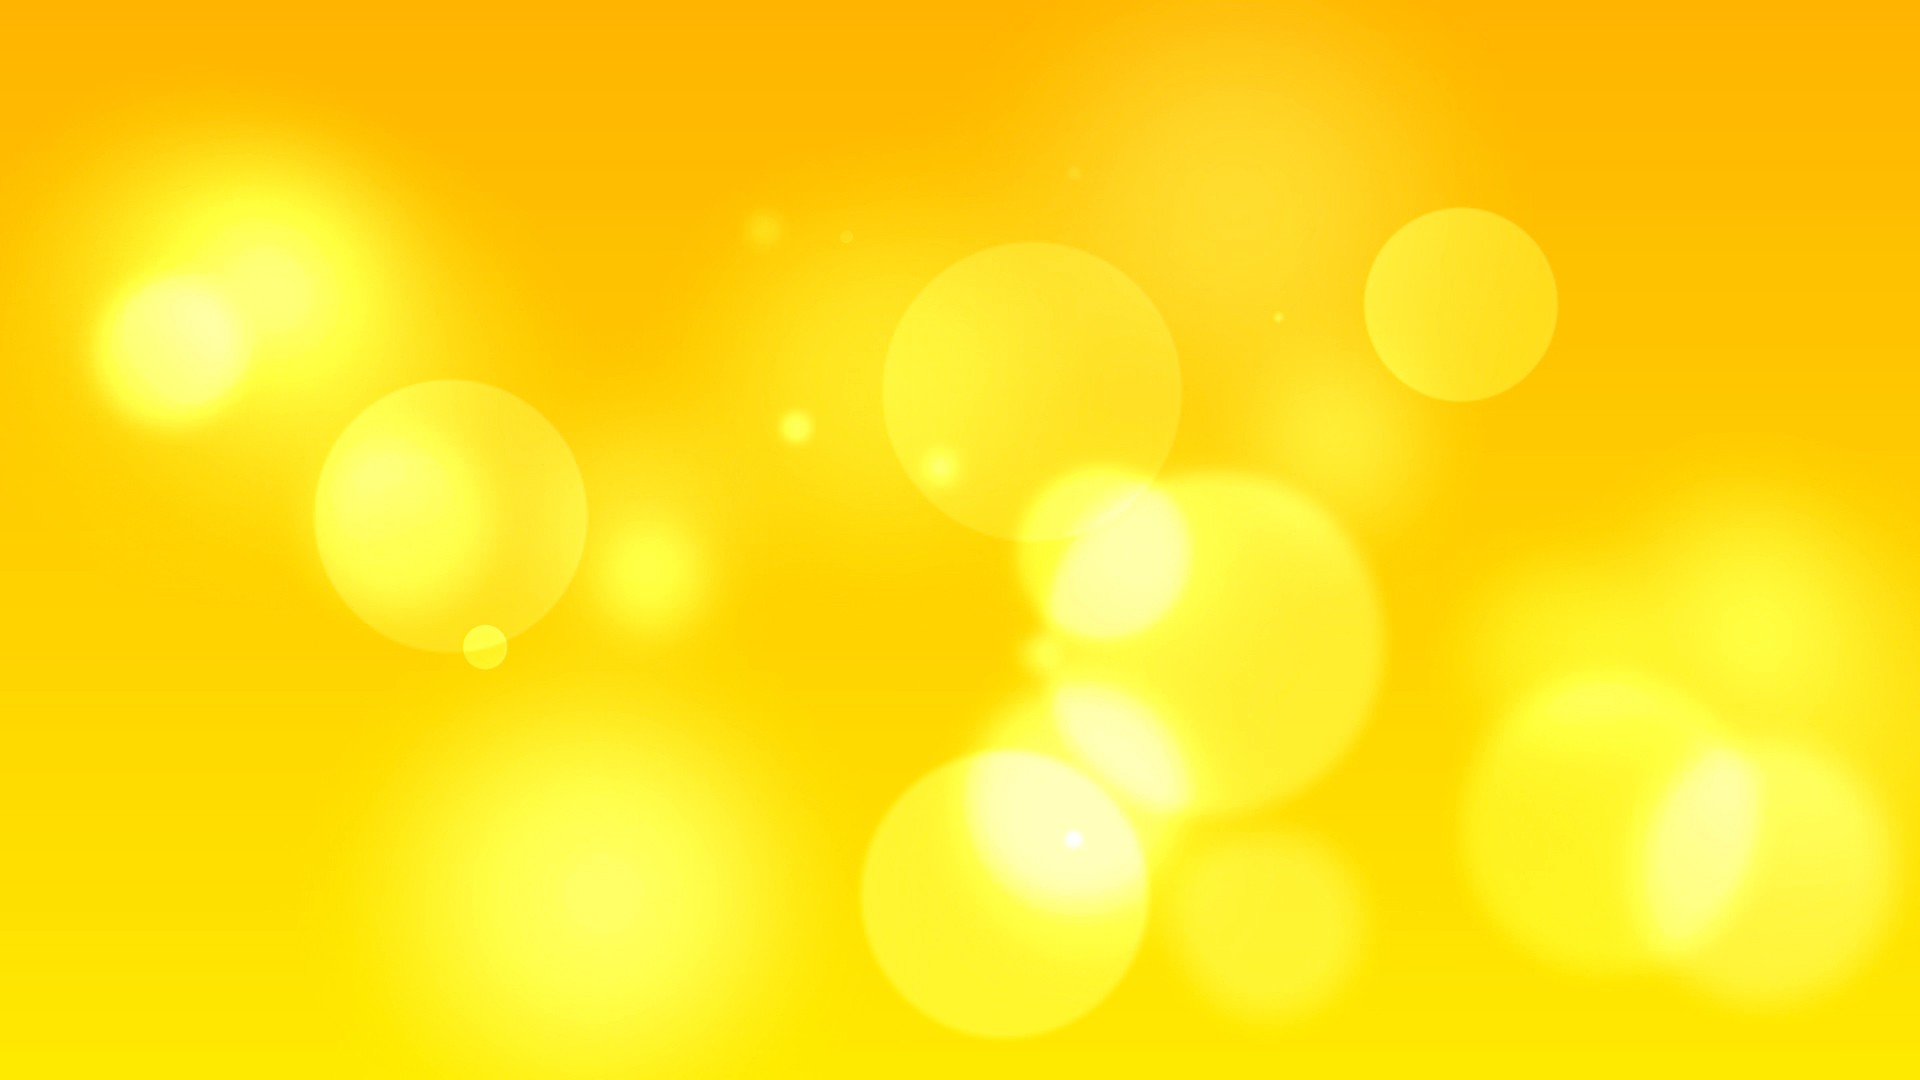 50+ Yellow backgrounds ·① Download free amazing full HD wallpapers for desktop computers and ...